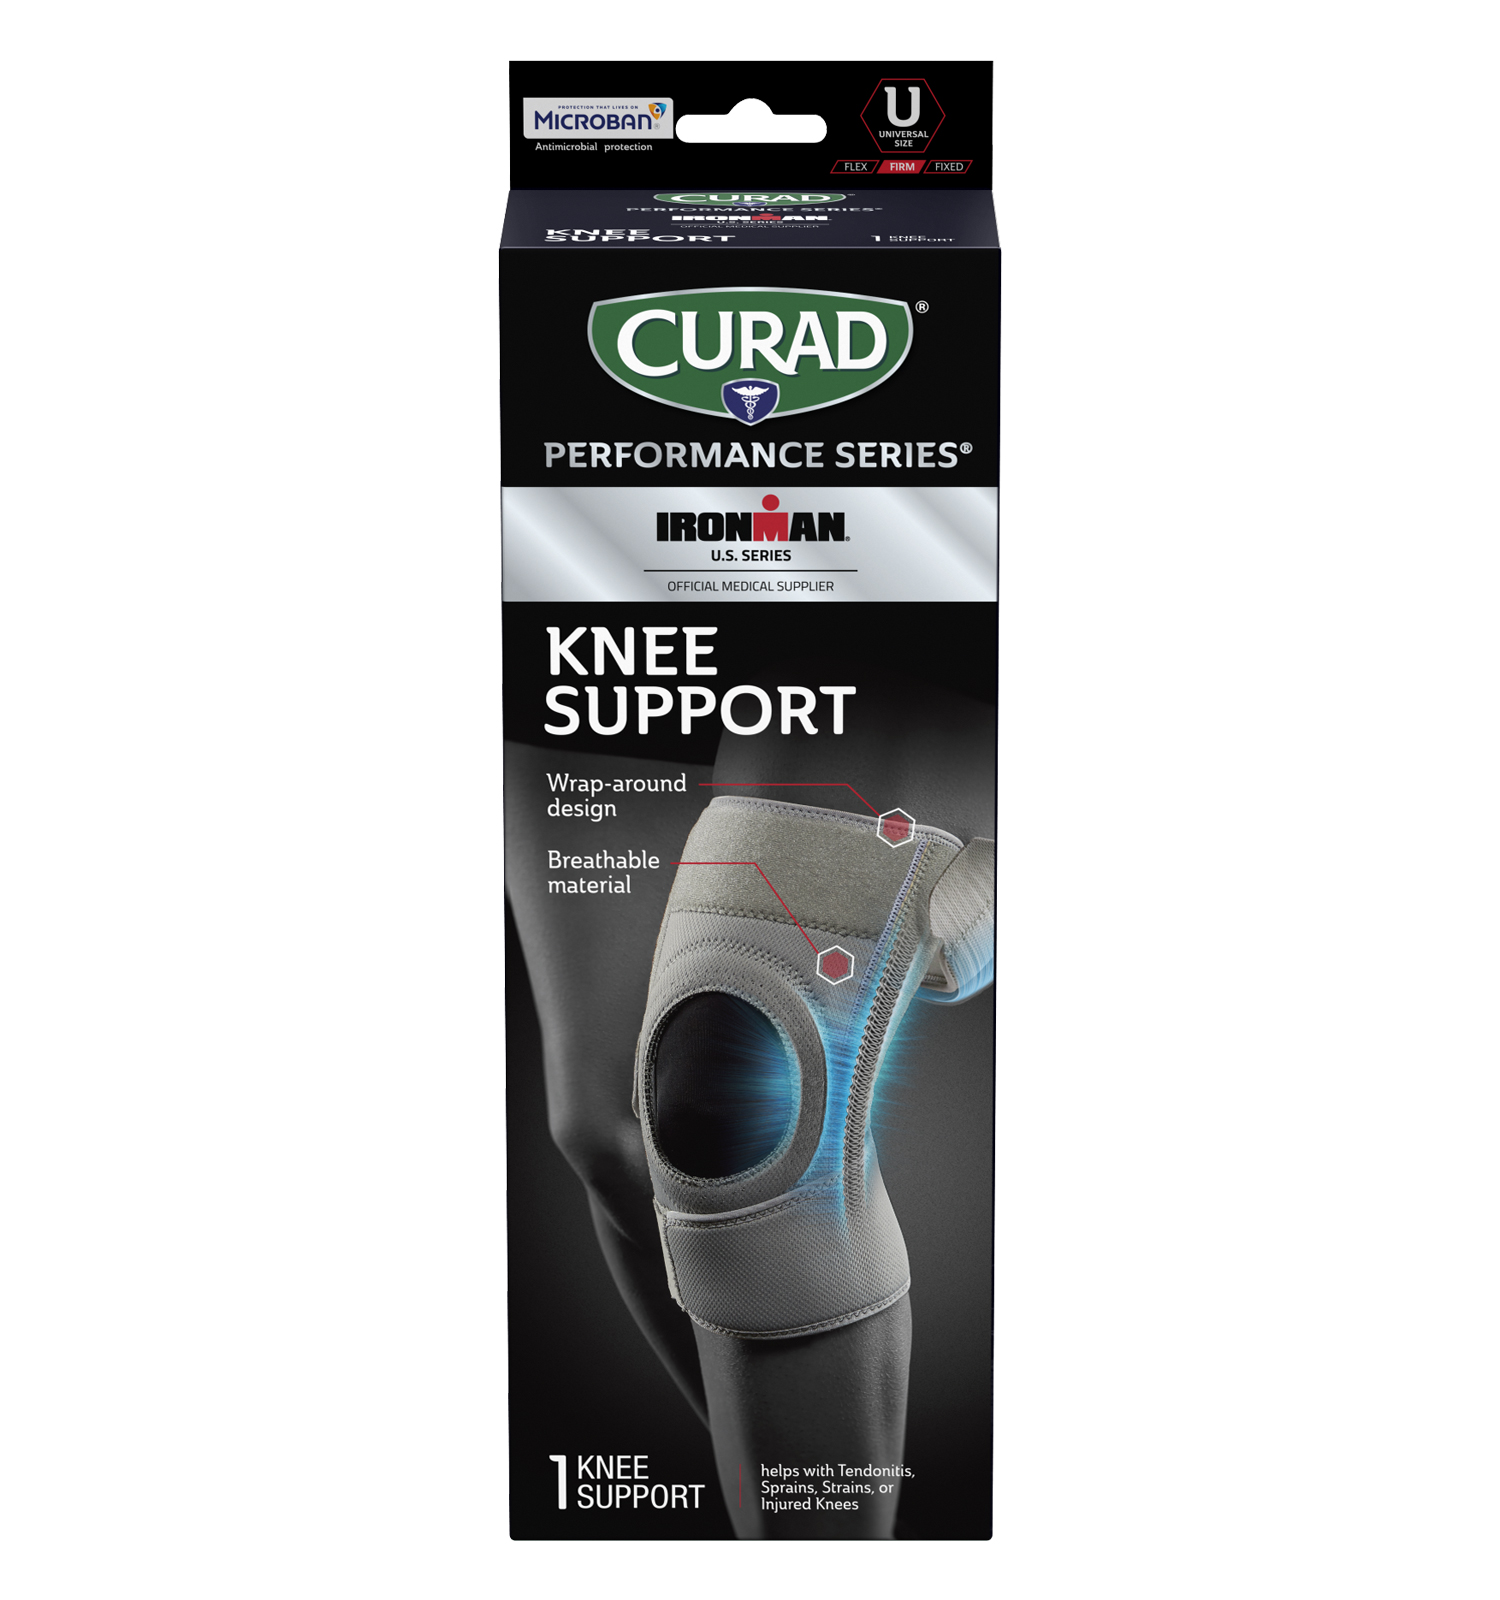 CURAD Performance Series IRONMAN Knee Support with Side